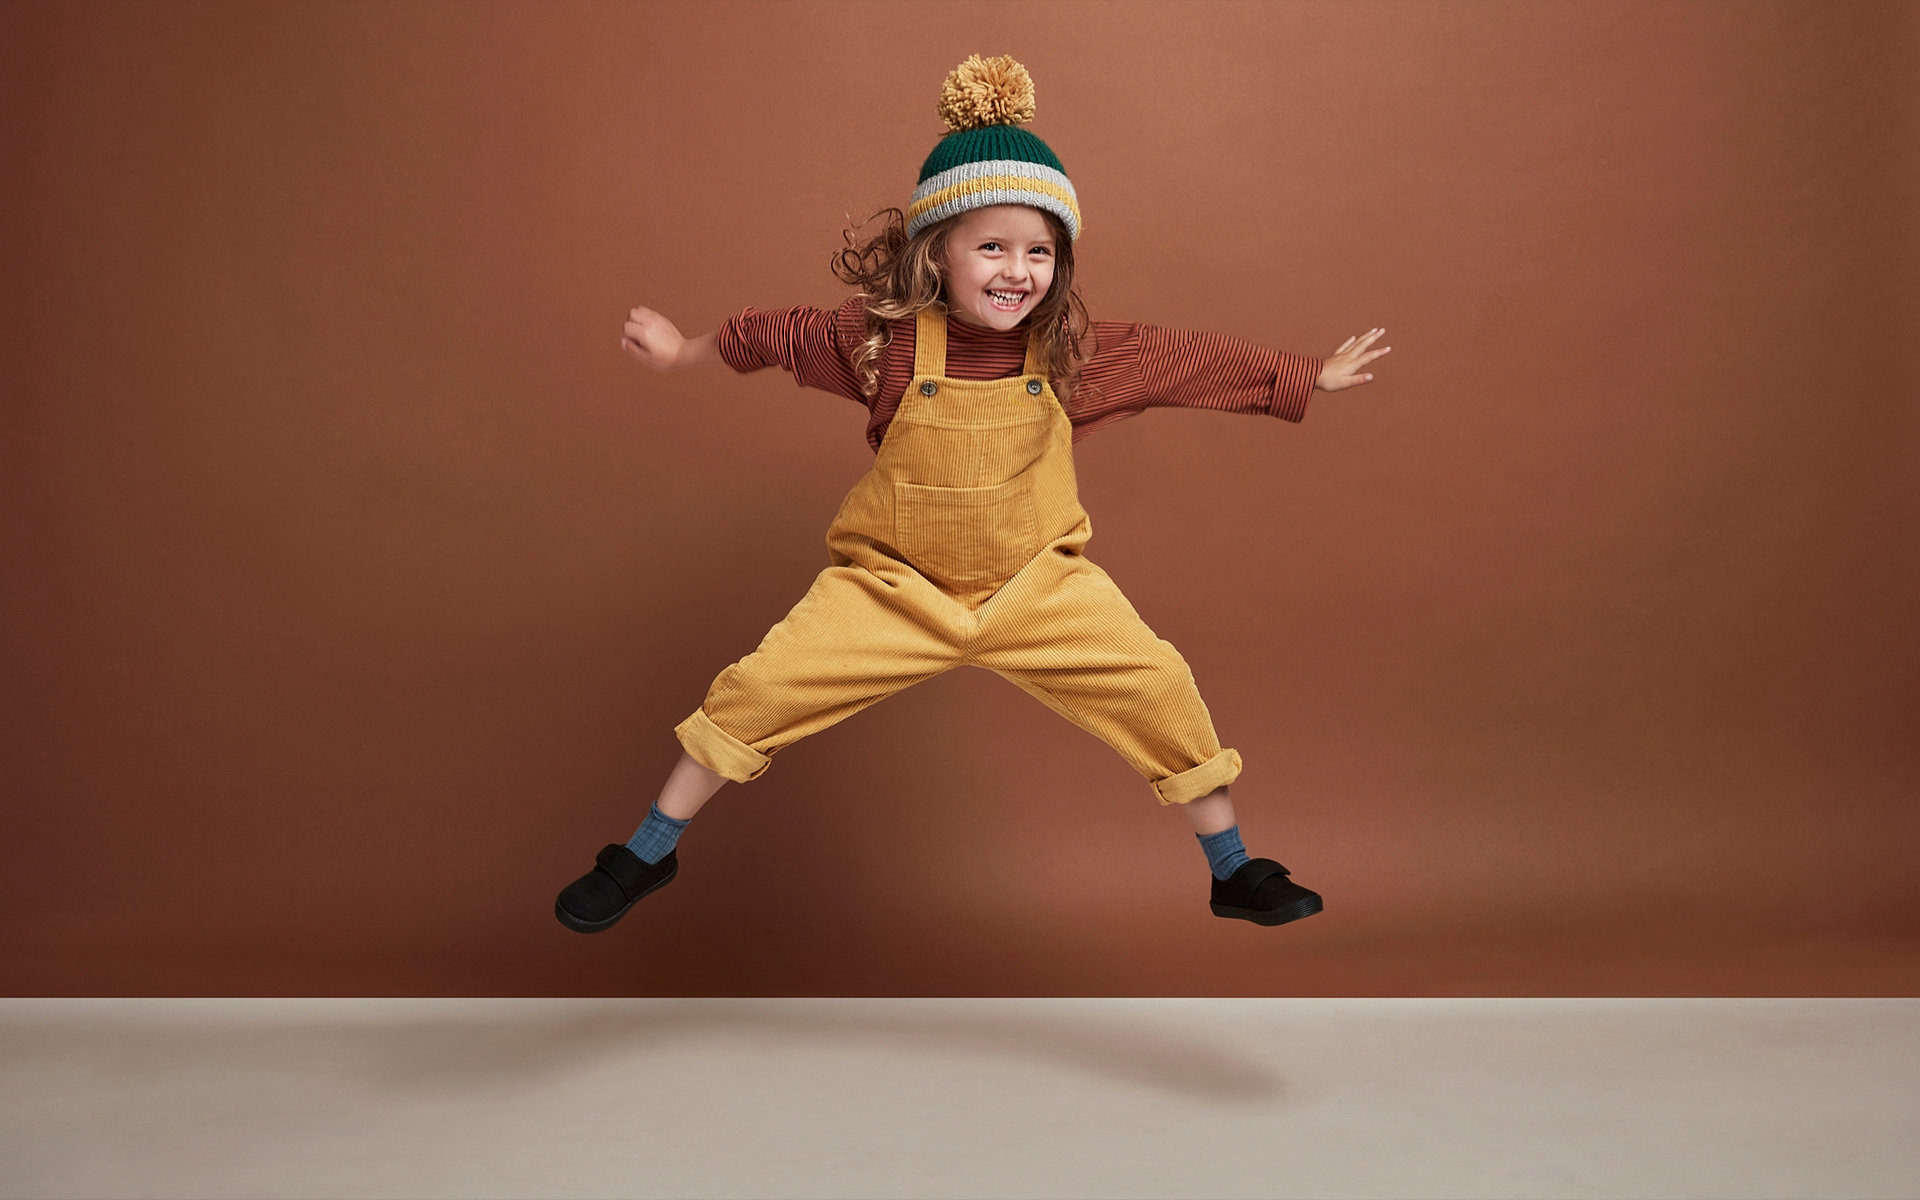 A child model jumping in the air on a clothing e commence photo shoot in front of a brown back drop in a photography studio